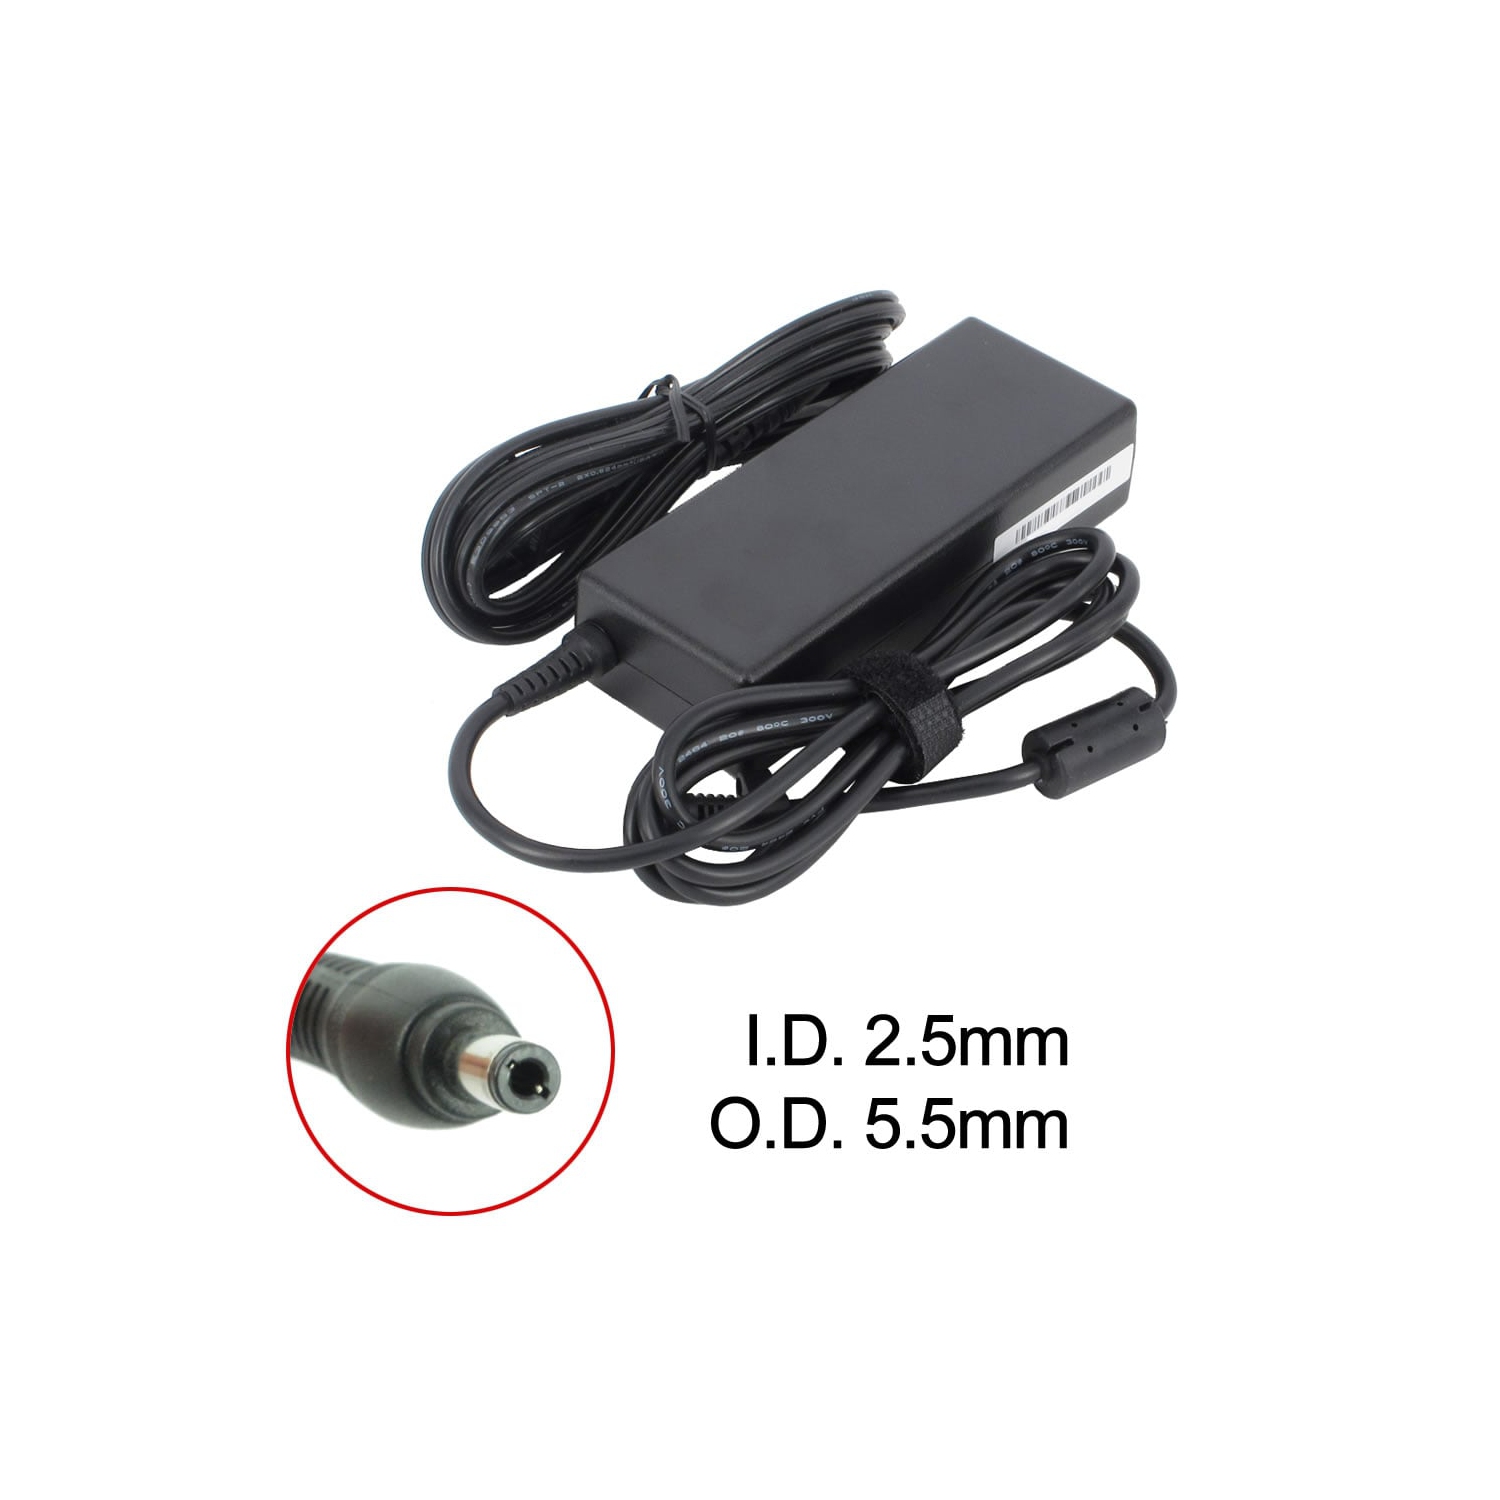 BATTDEPOT New Laptop AC Adapter for Asus X35S 04G266006220 2525534 90-N6APW2010 ADP-60ZH PA-1900-05W PX5035E-1PWR